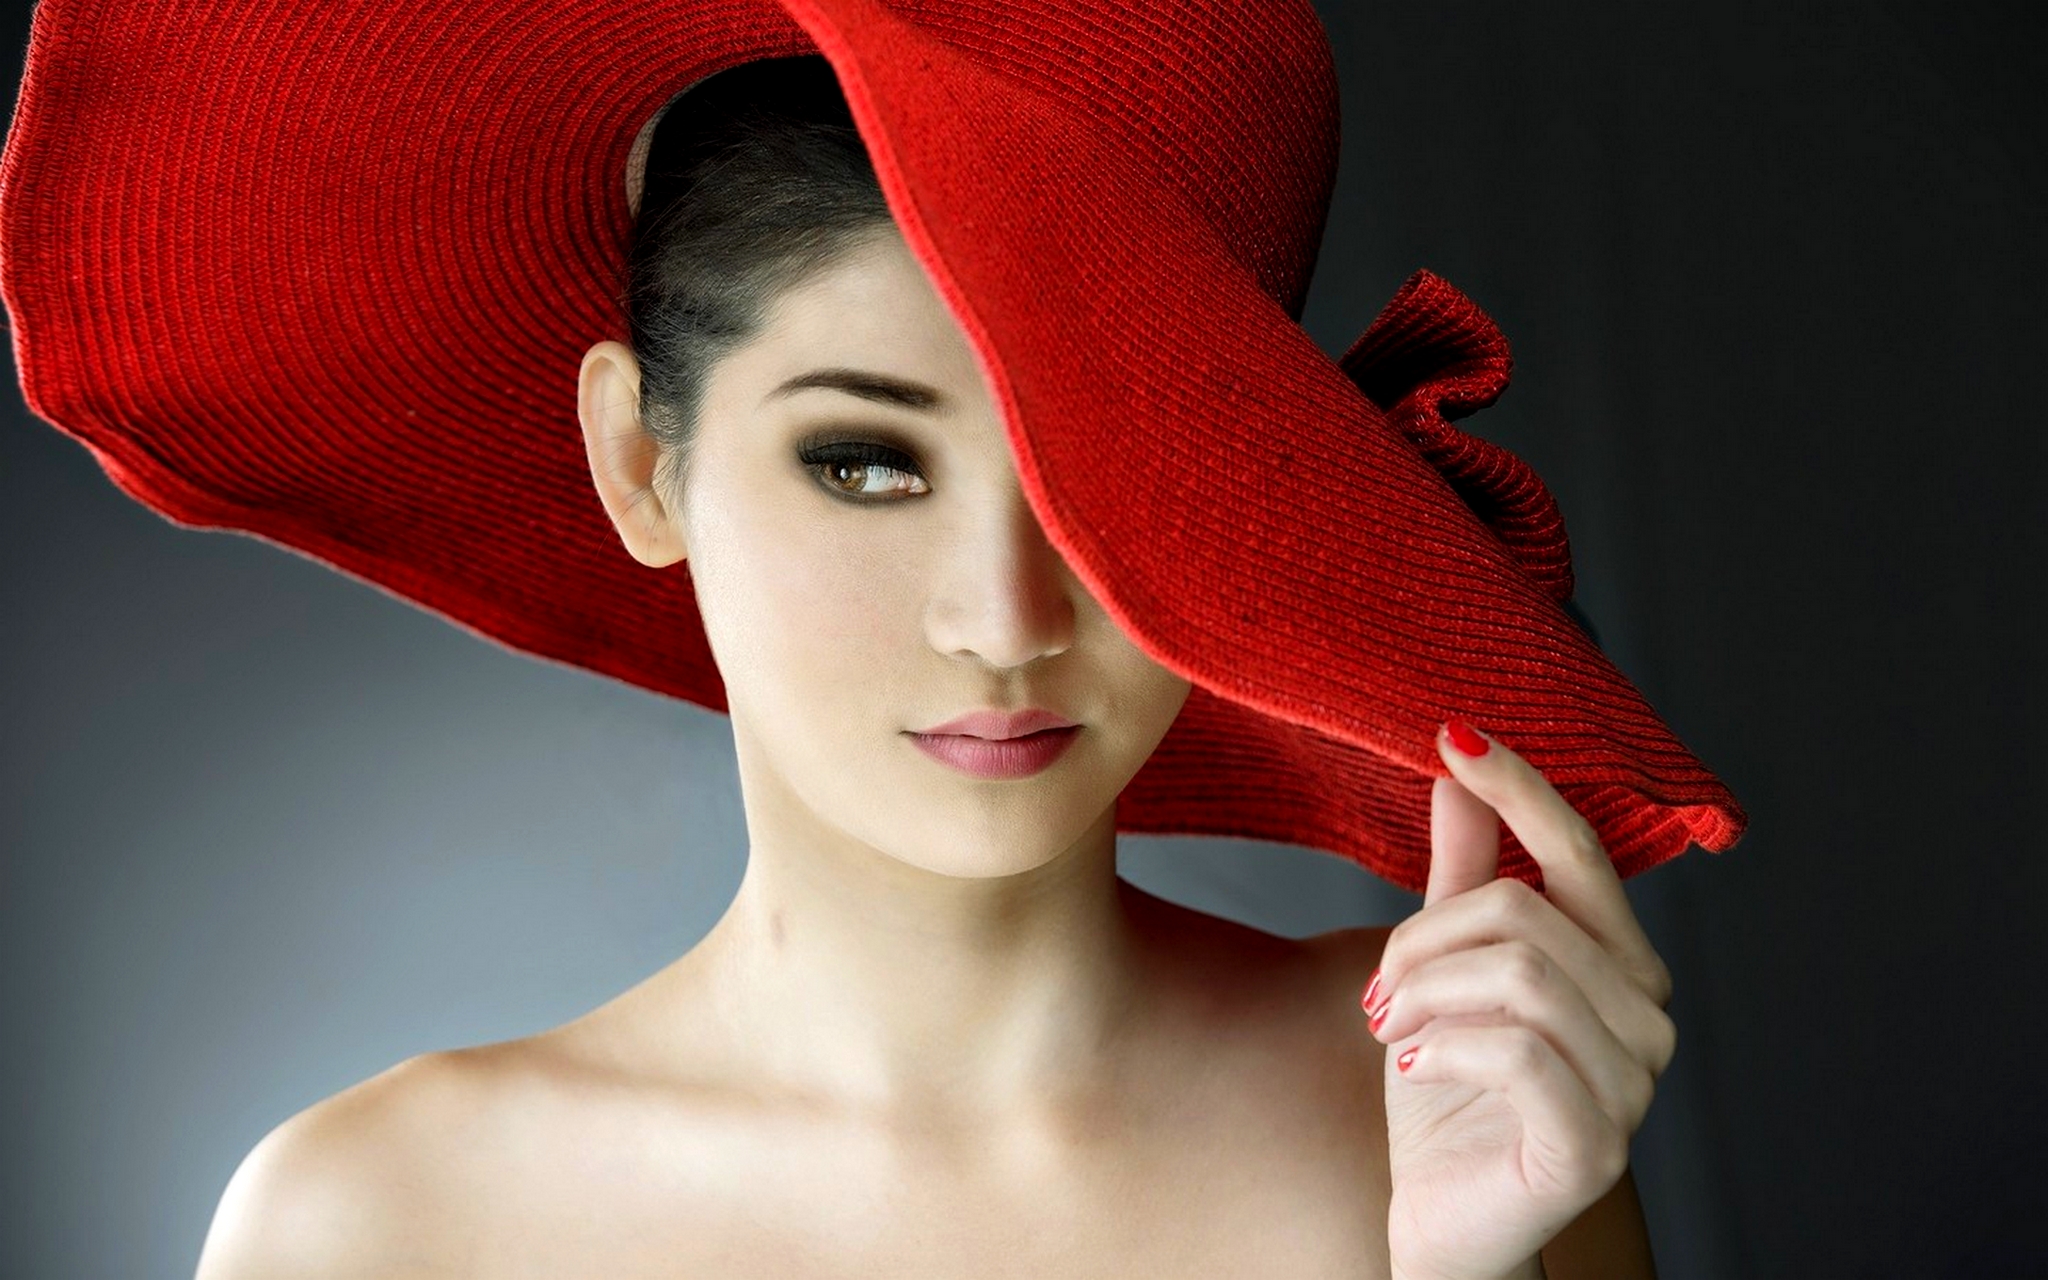 red hat beauty | root chakra | Pinterest | Red hats